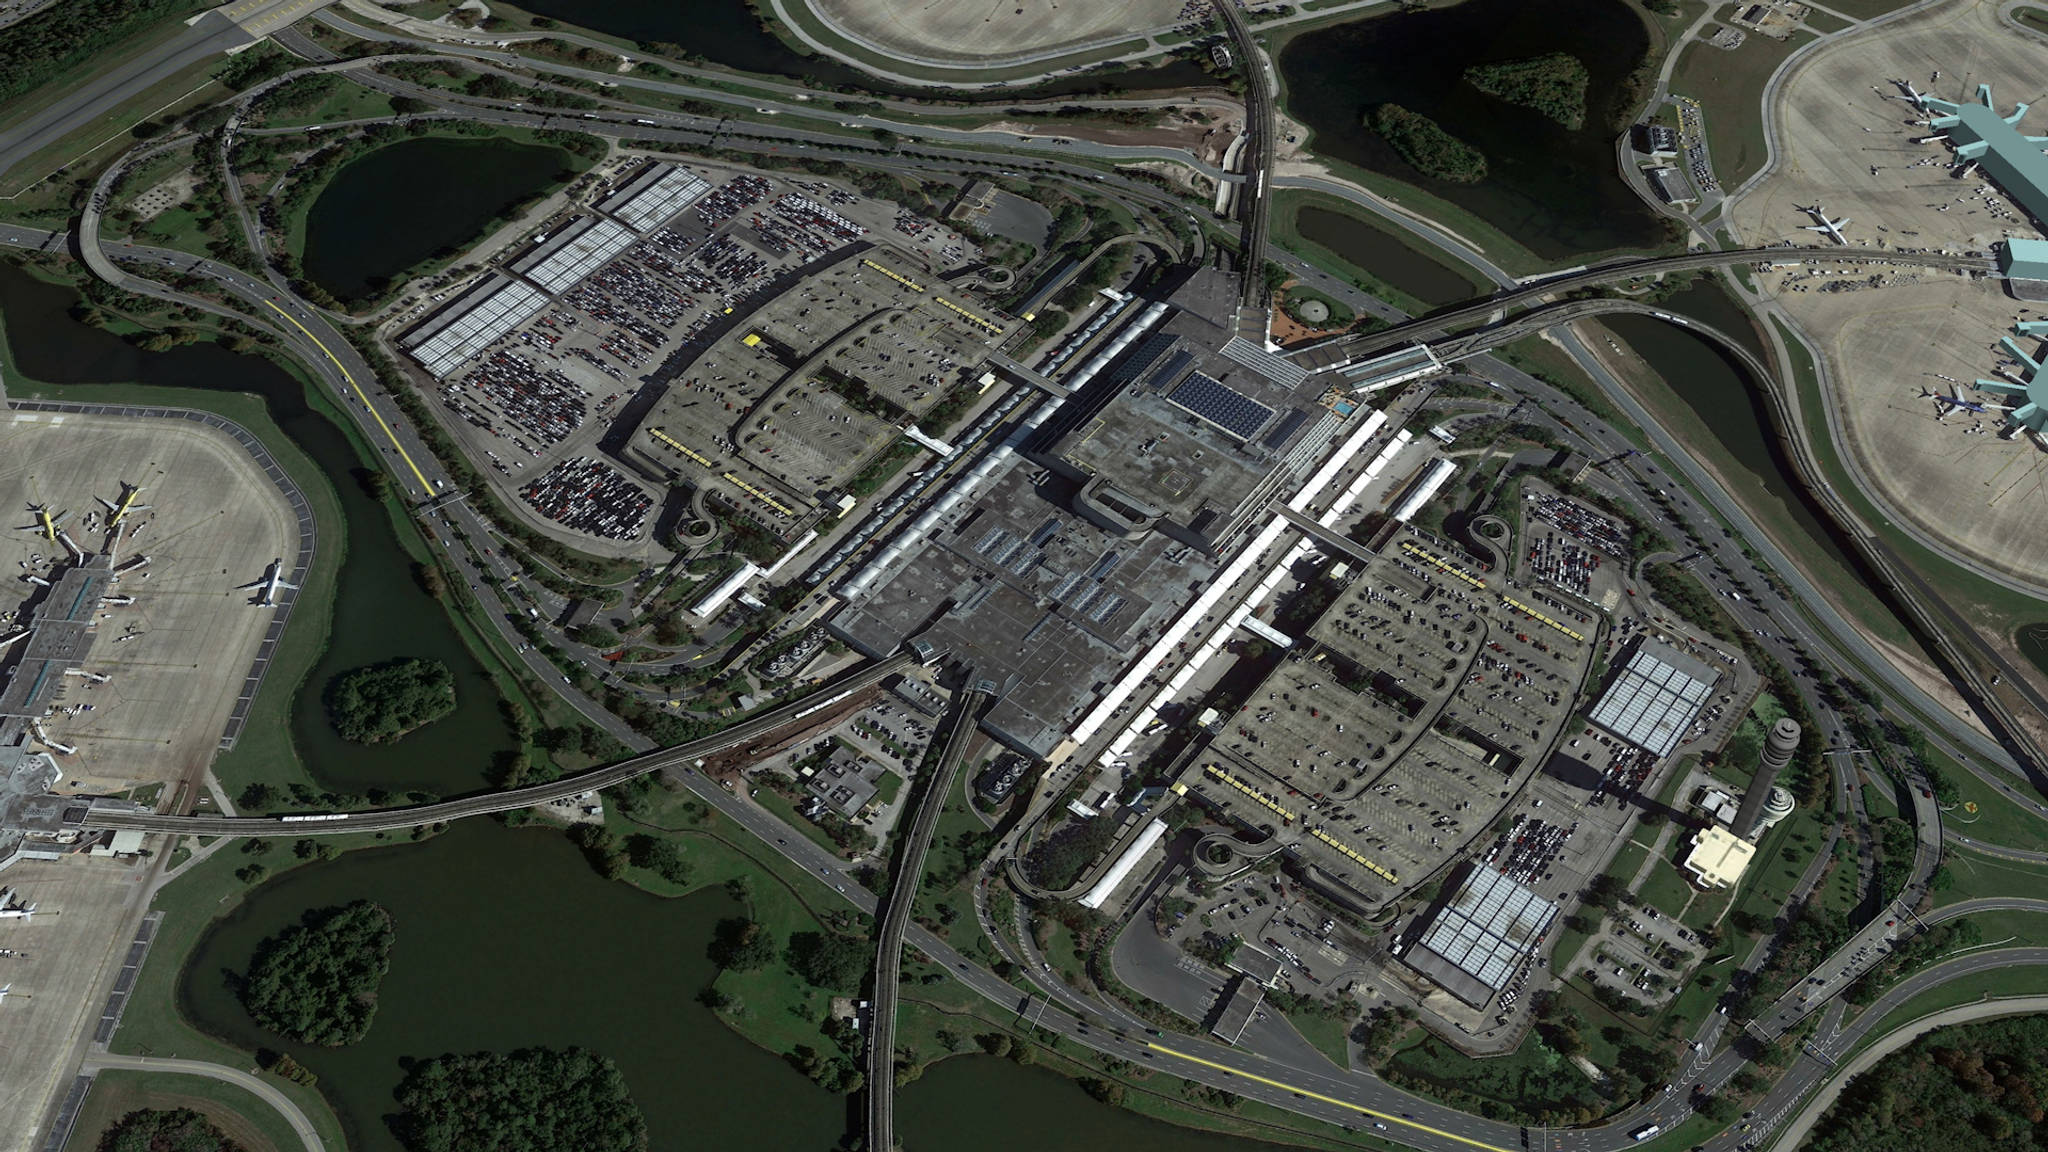  Aerial View of Orlando Airport Parking